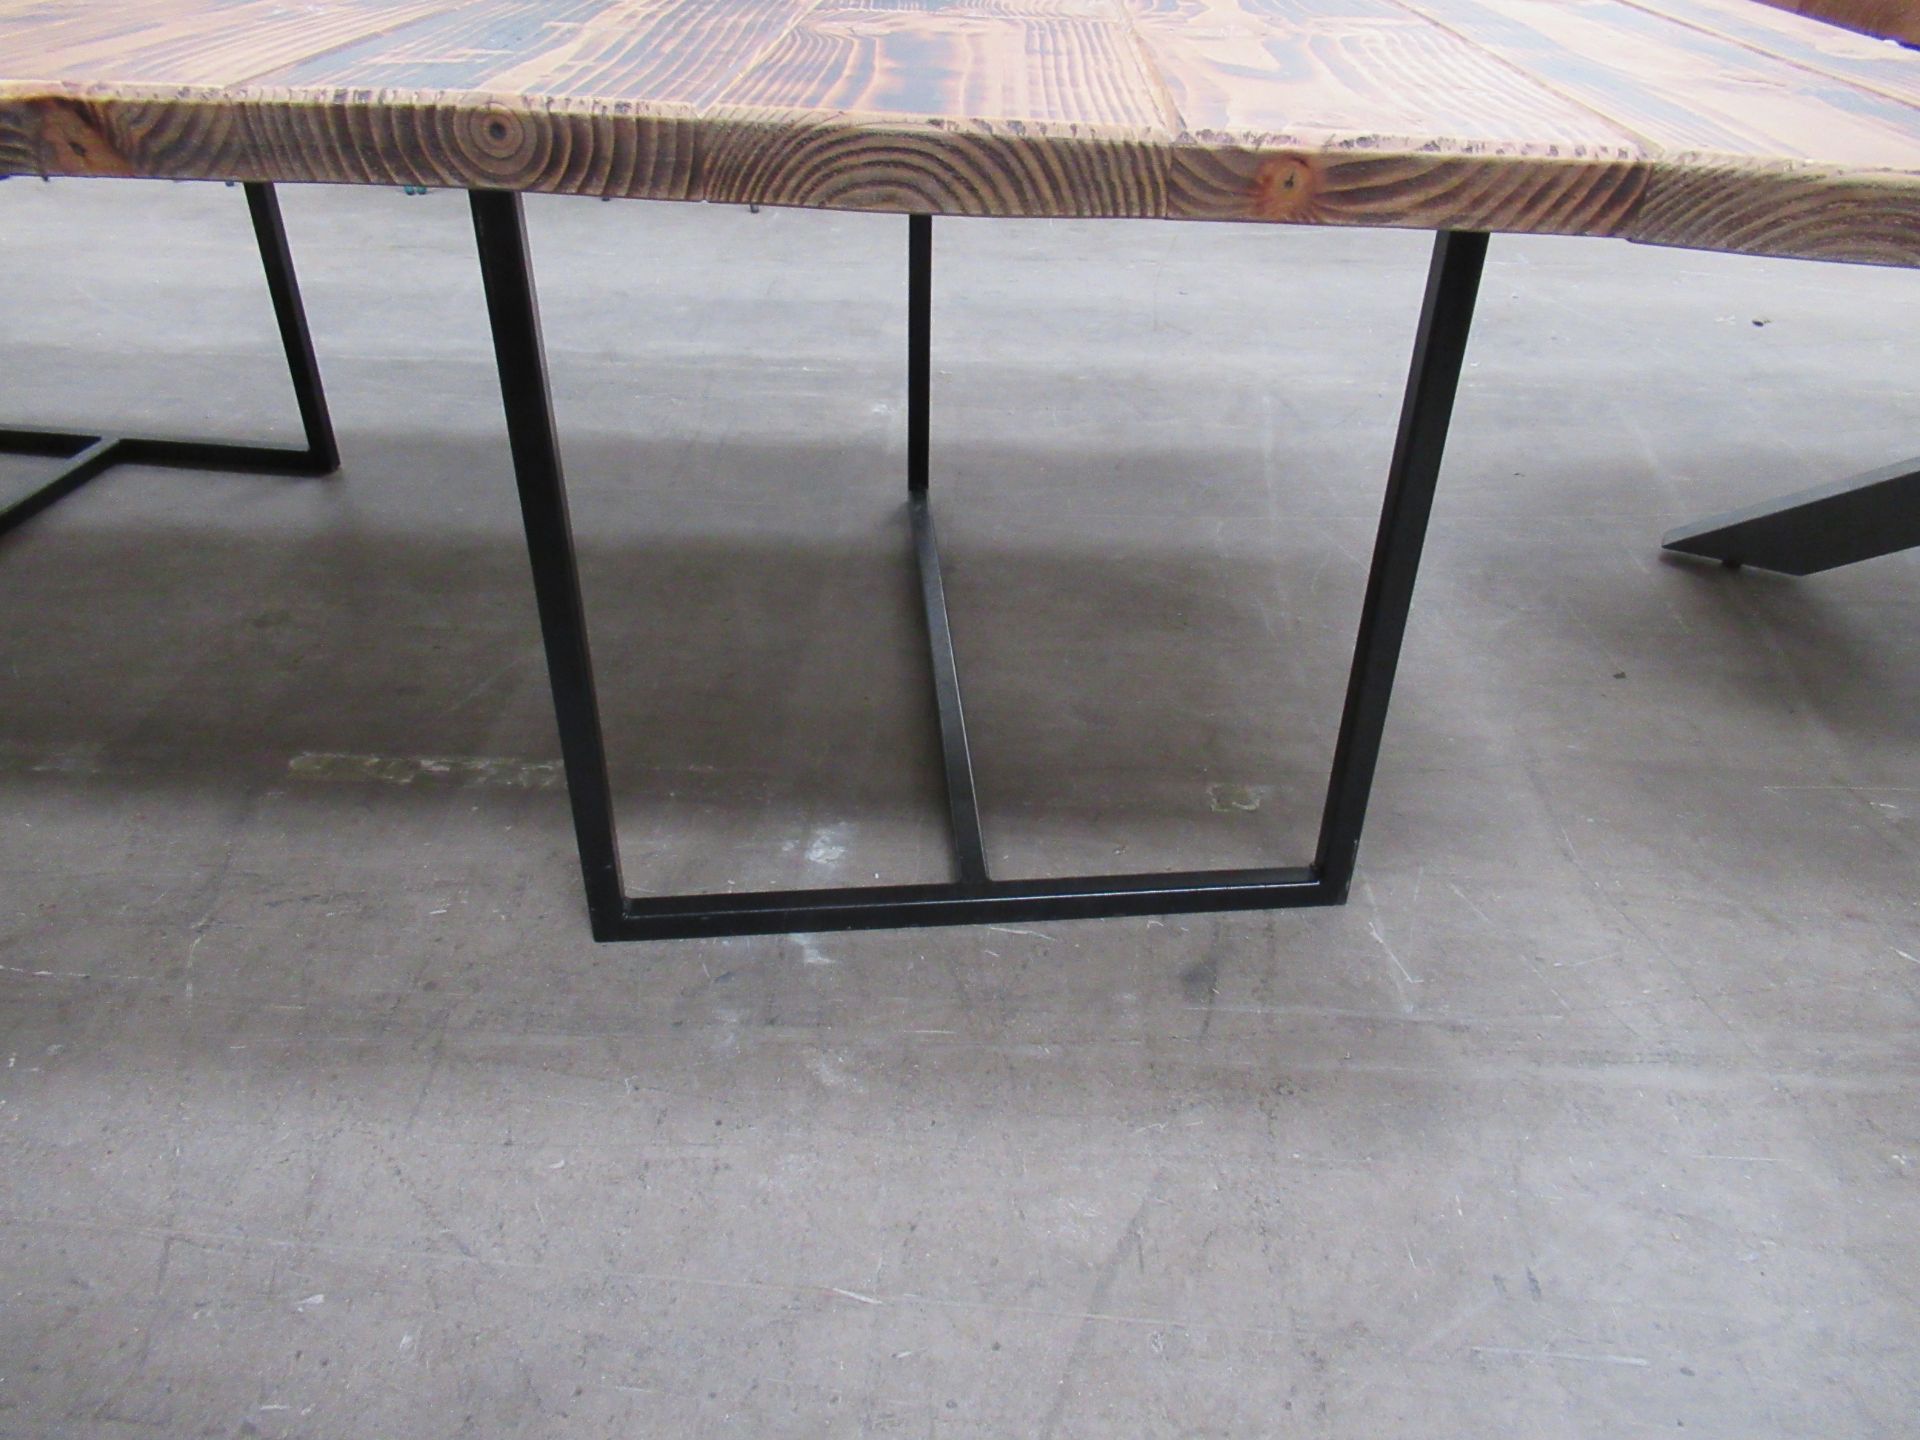 Large Rustic Effect Table (2x Parts) (3200/1600 x 1370mm) - Image 3 of 5